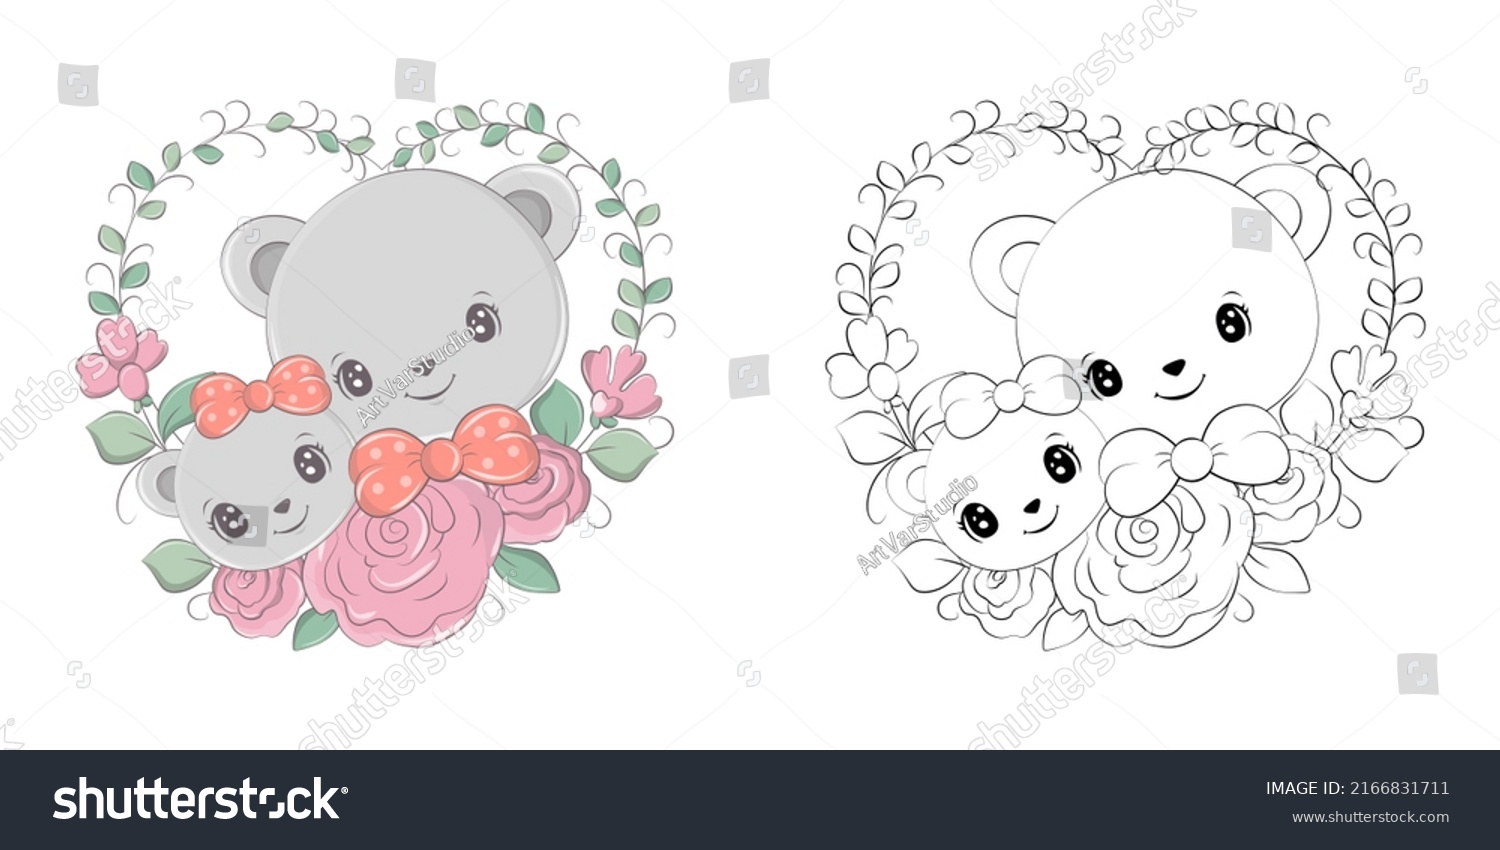 SVG of Cute Clipart Bear Illustration and For Coloring Page. Cartoon Clip Art Family of Bears on a Floral Background. Vector Illustration of an Animal for Stickers, Coloring Pages, Prints for Clothes.  svg